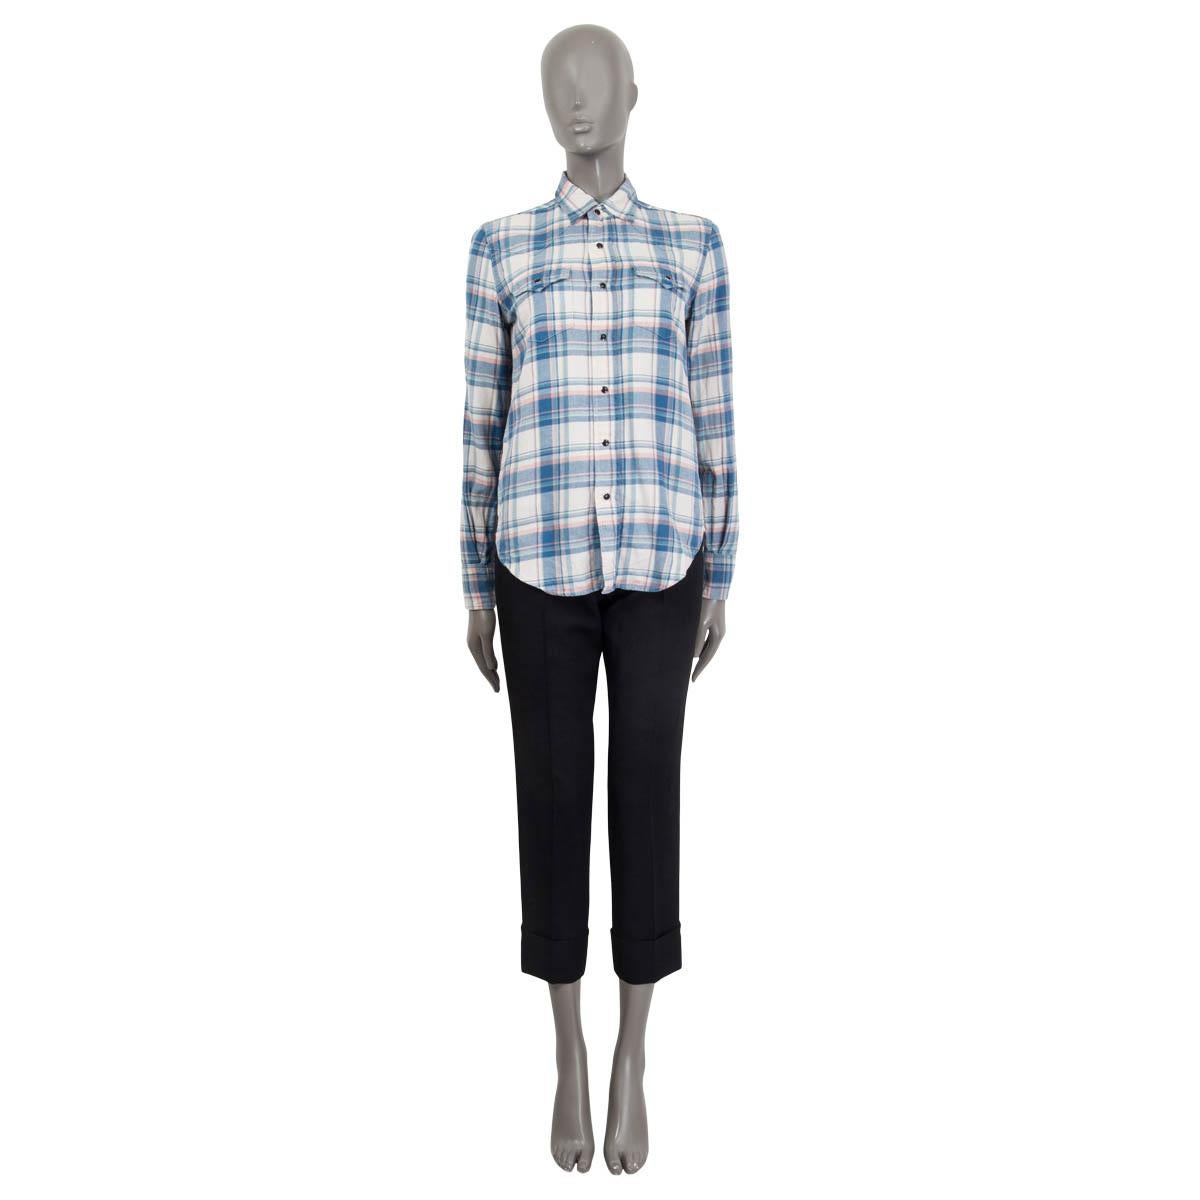 100% authentic Saint Laurent flannel plaid western shirt in blue, baby pink and off-white cotton (85%), linen (8%) and ramie (7%). Features two buttoned flap pockets at the chest and buttoned cuffs. Opens with seven push buttons on the front.